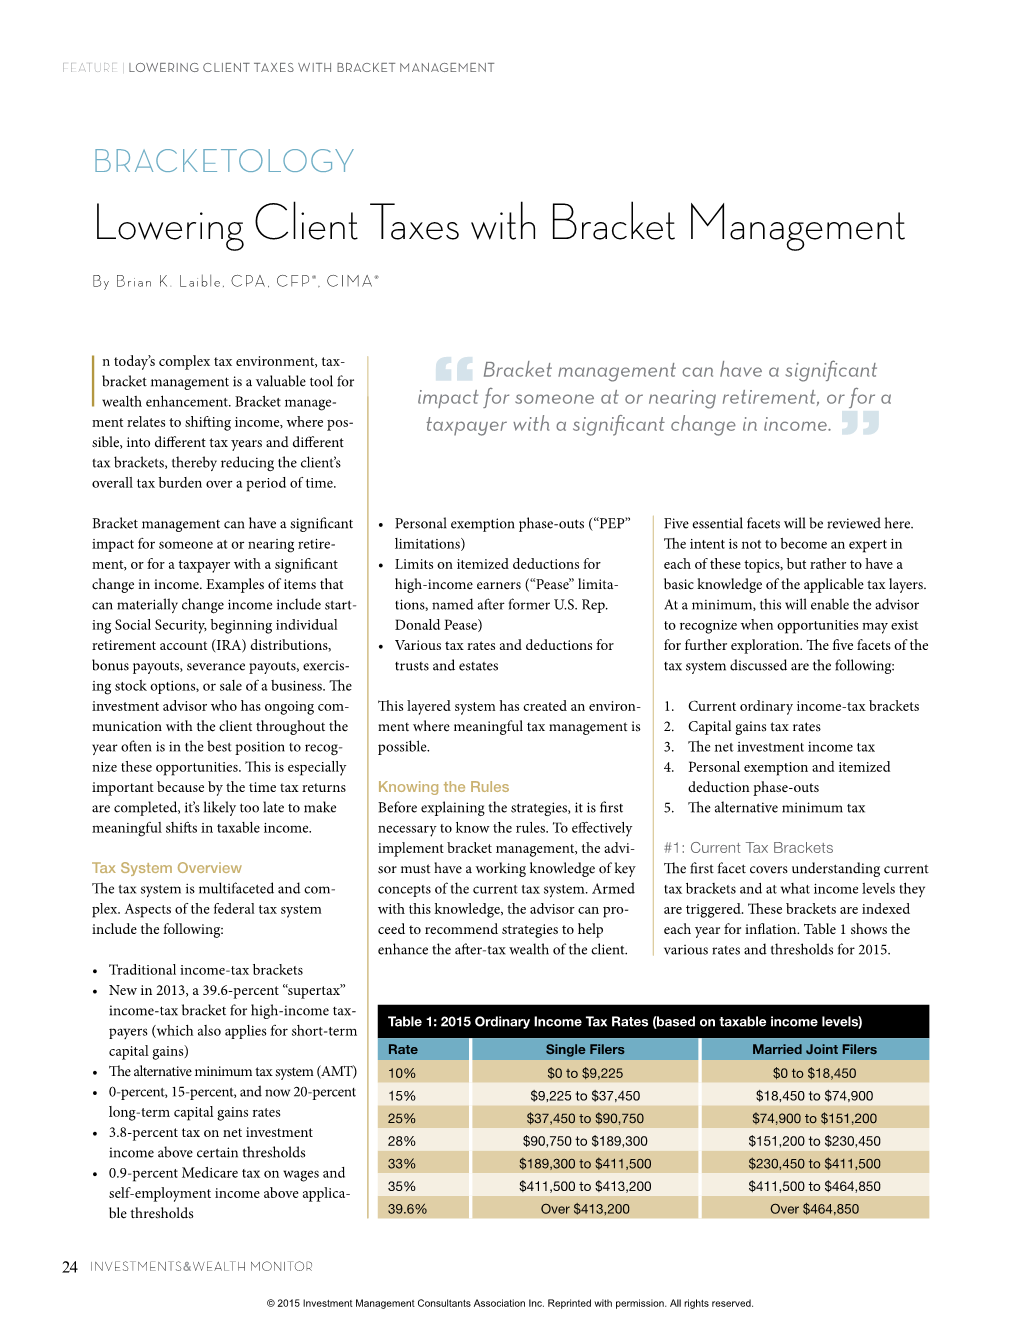 Lowering Client Taxes with Bracket Management